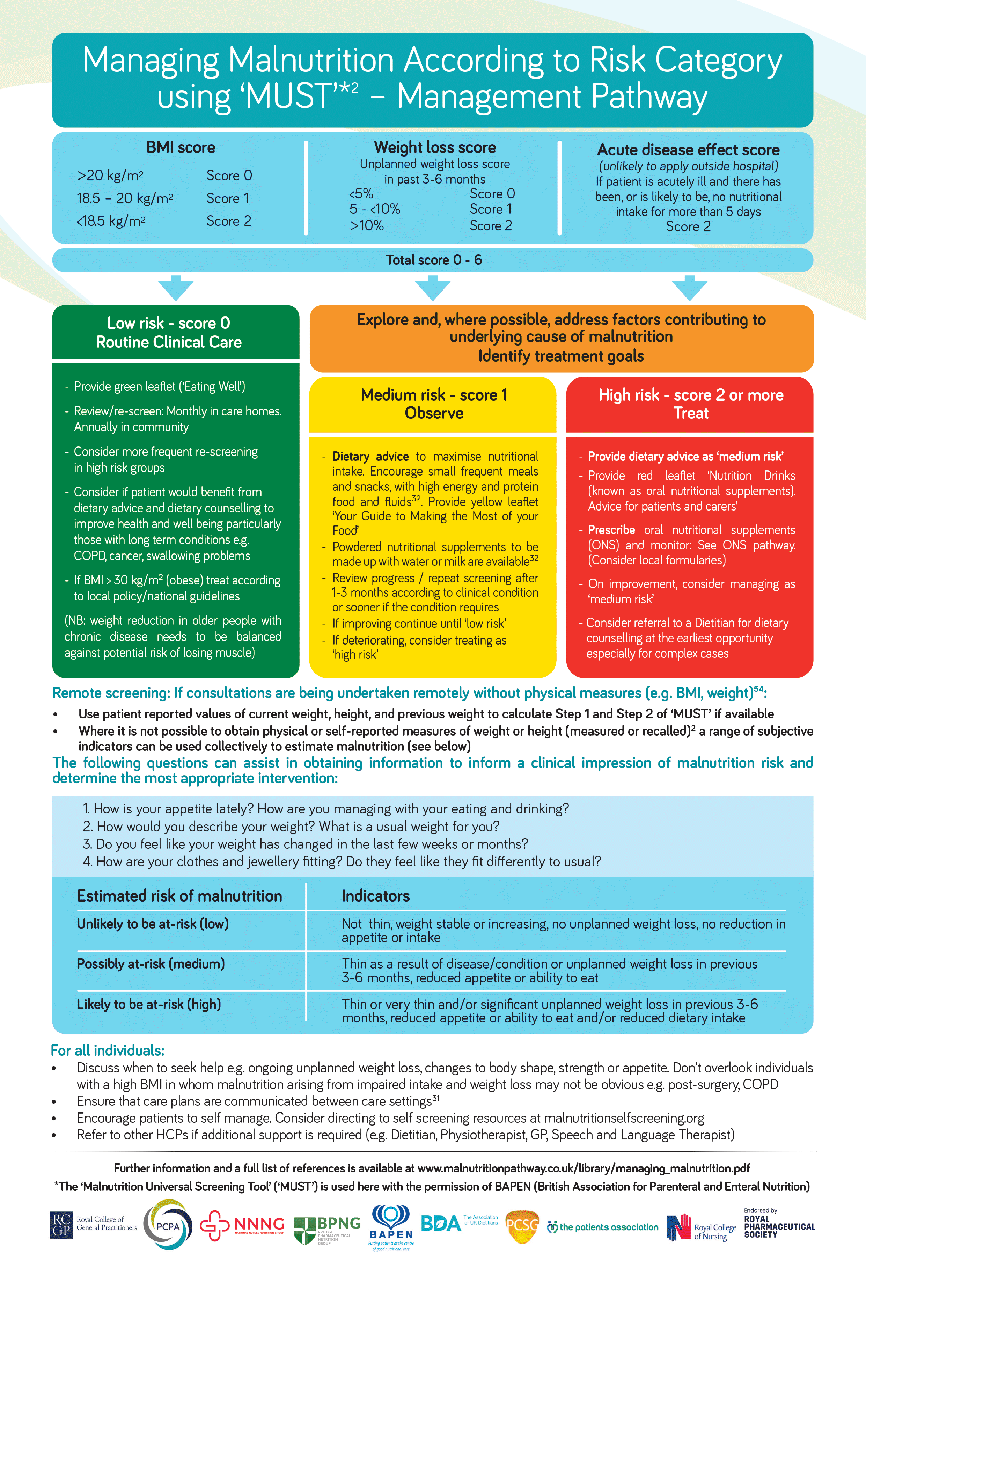 Poster: using ‘MUST’ Care Pathway